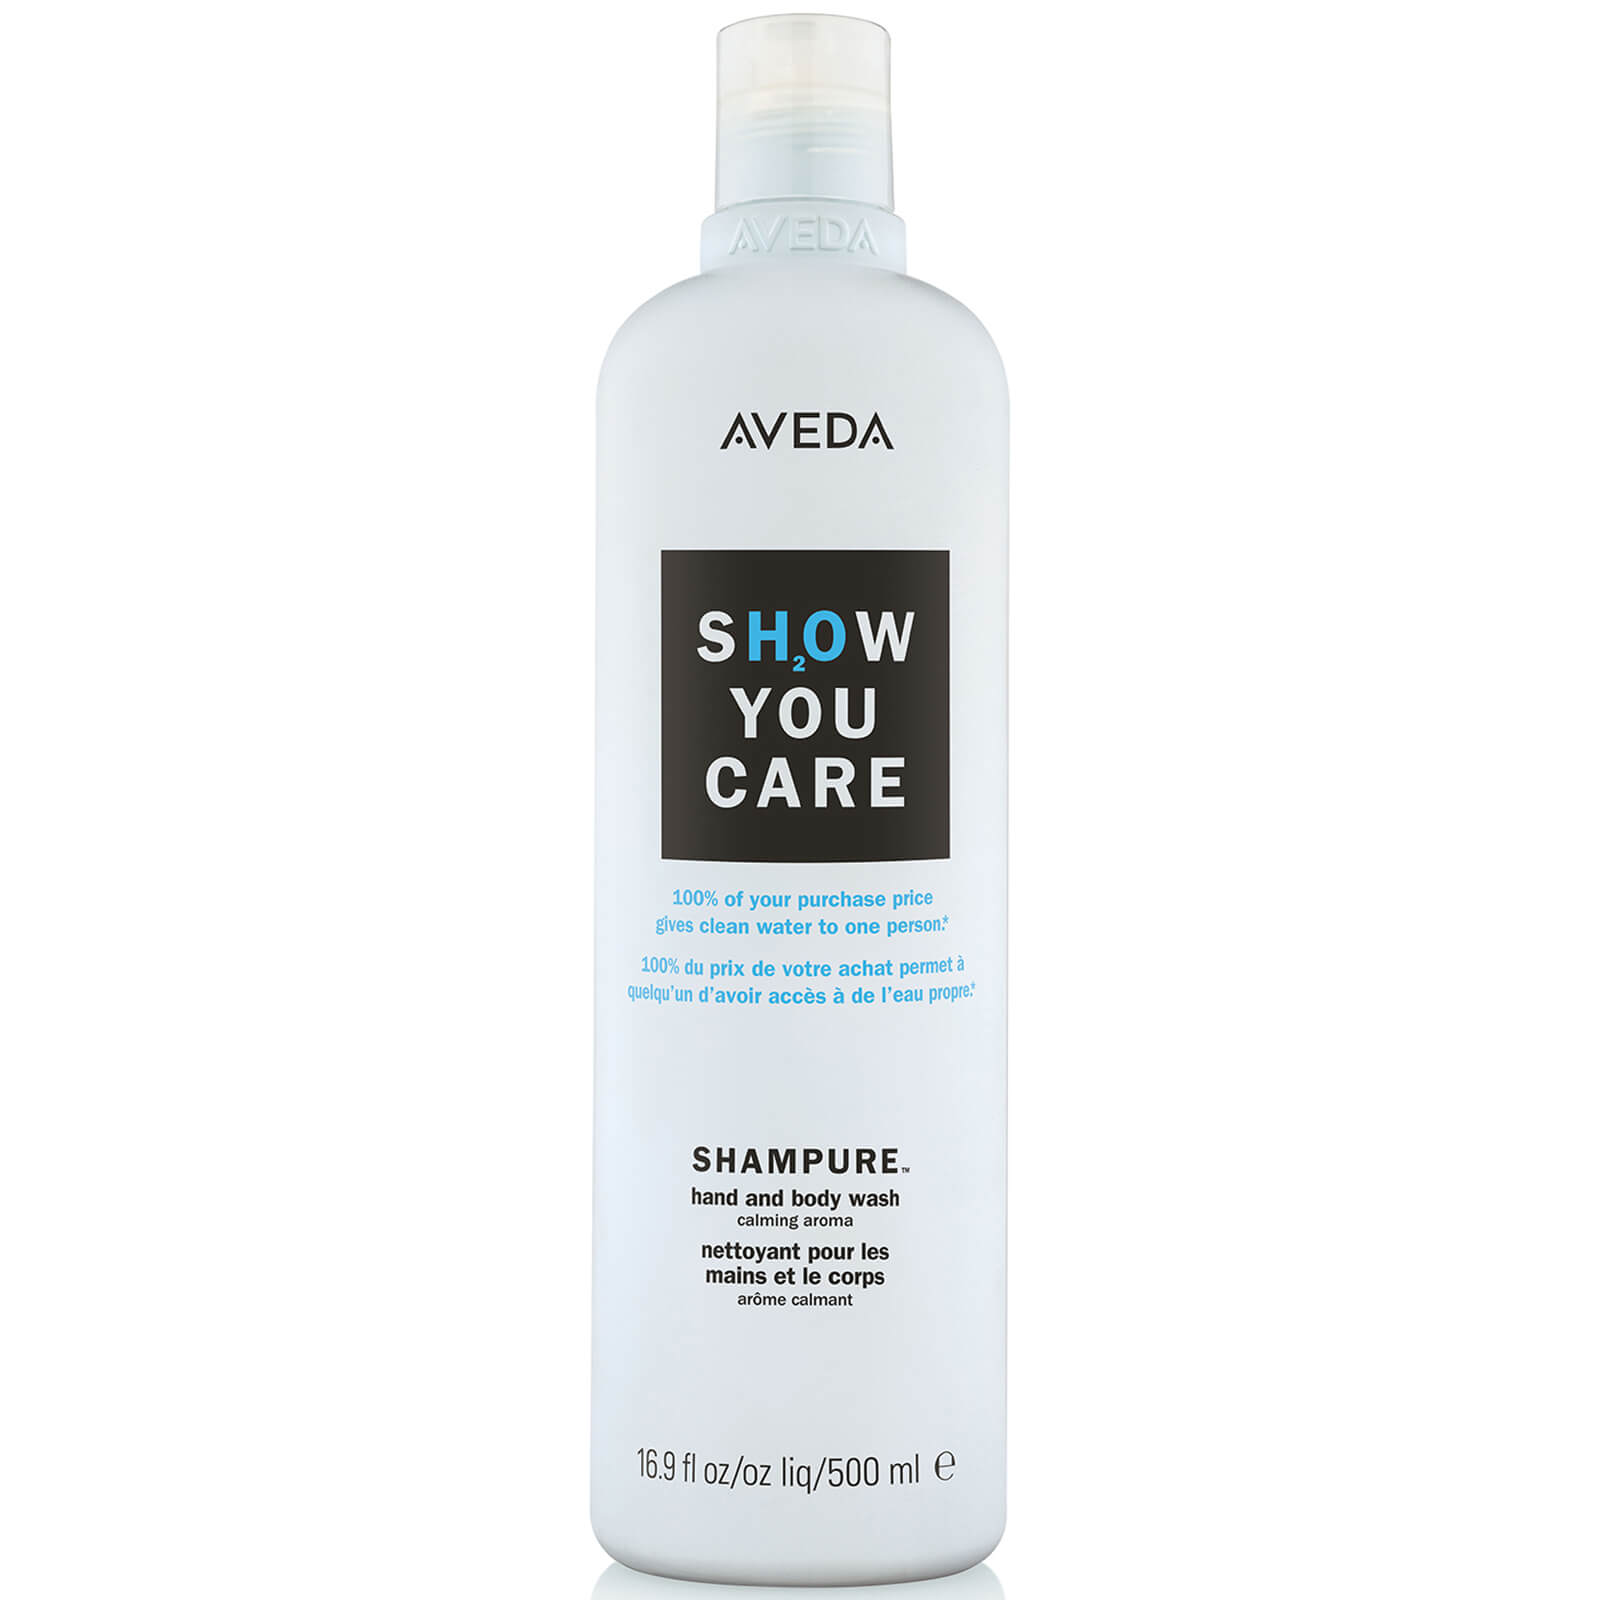 Aveda Shampure Hand and Body Wash Limited Edition 500ml